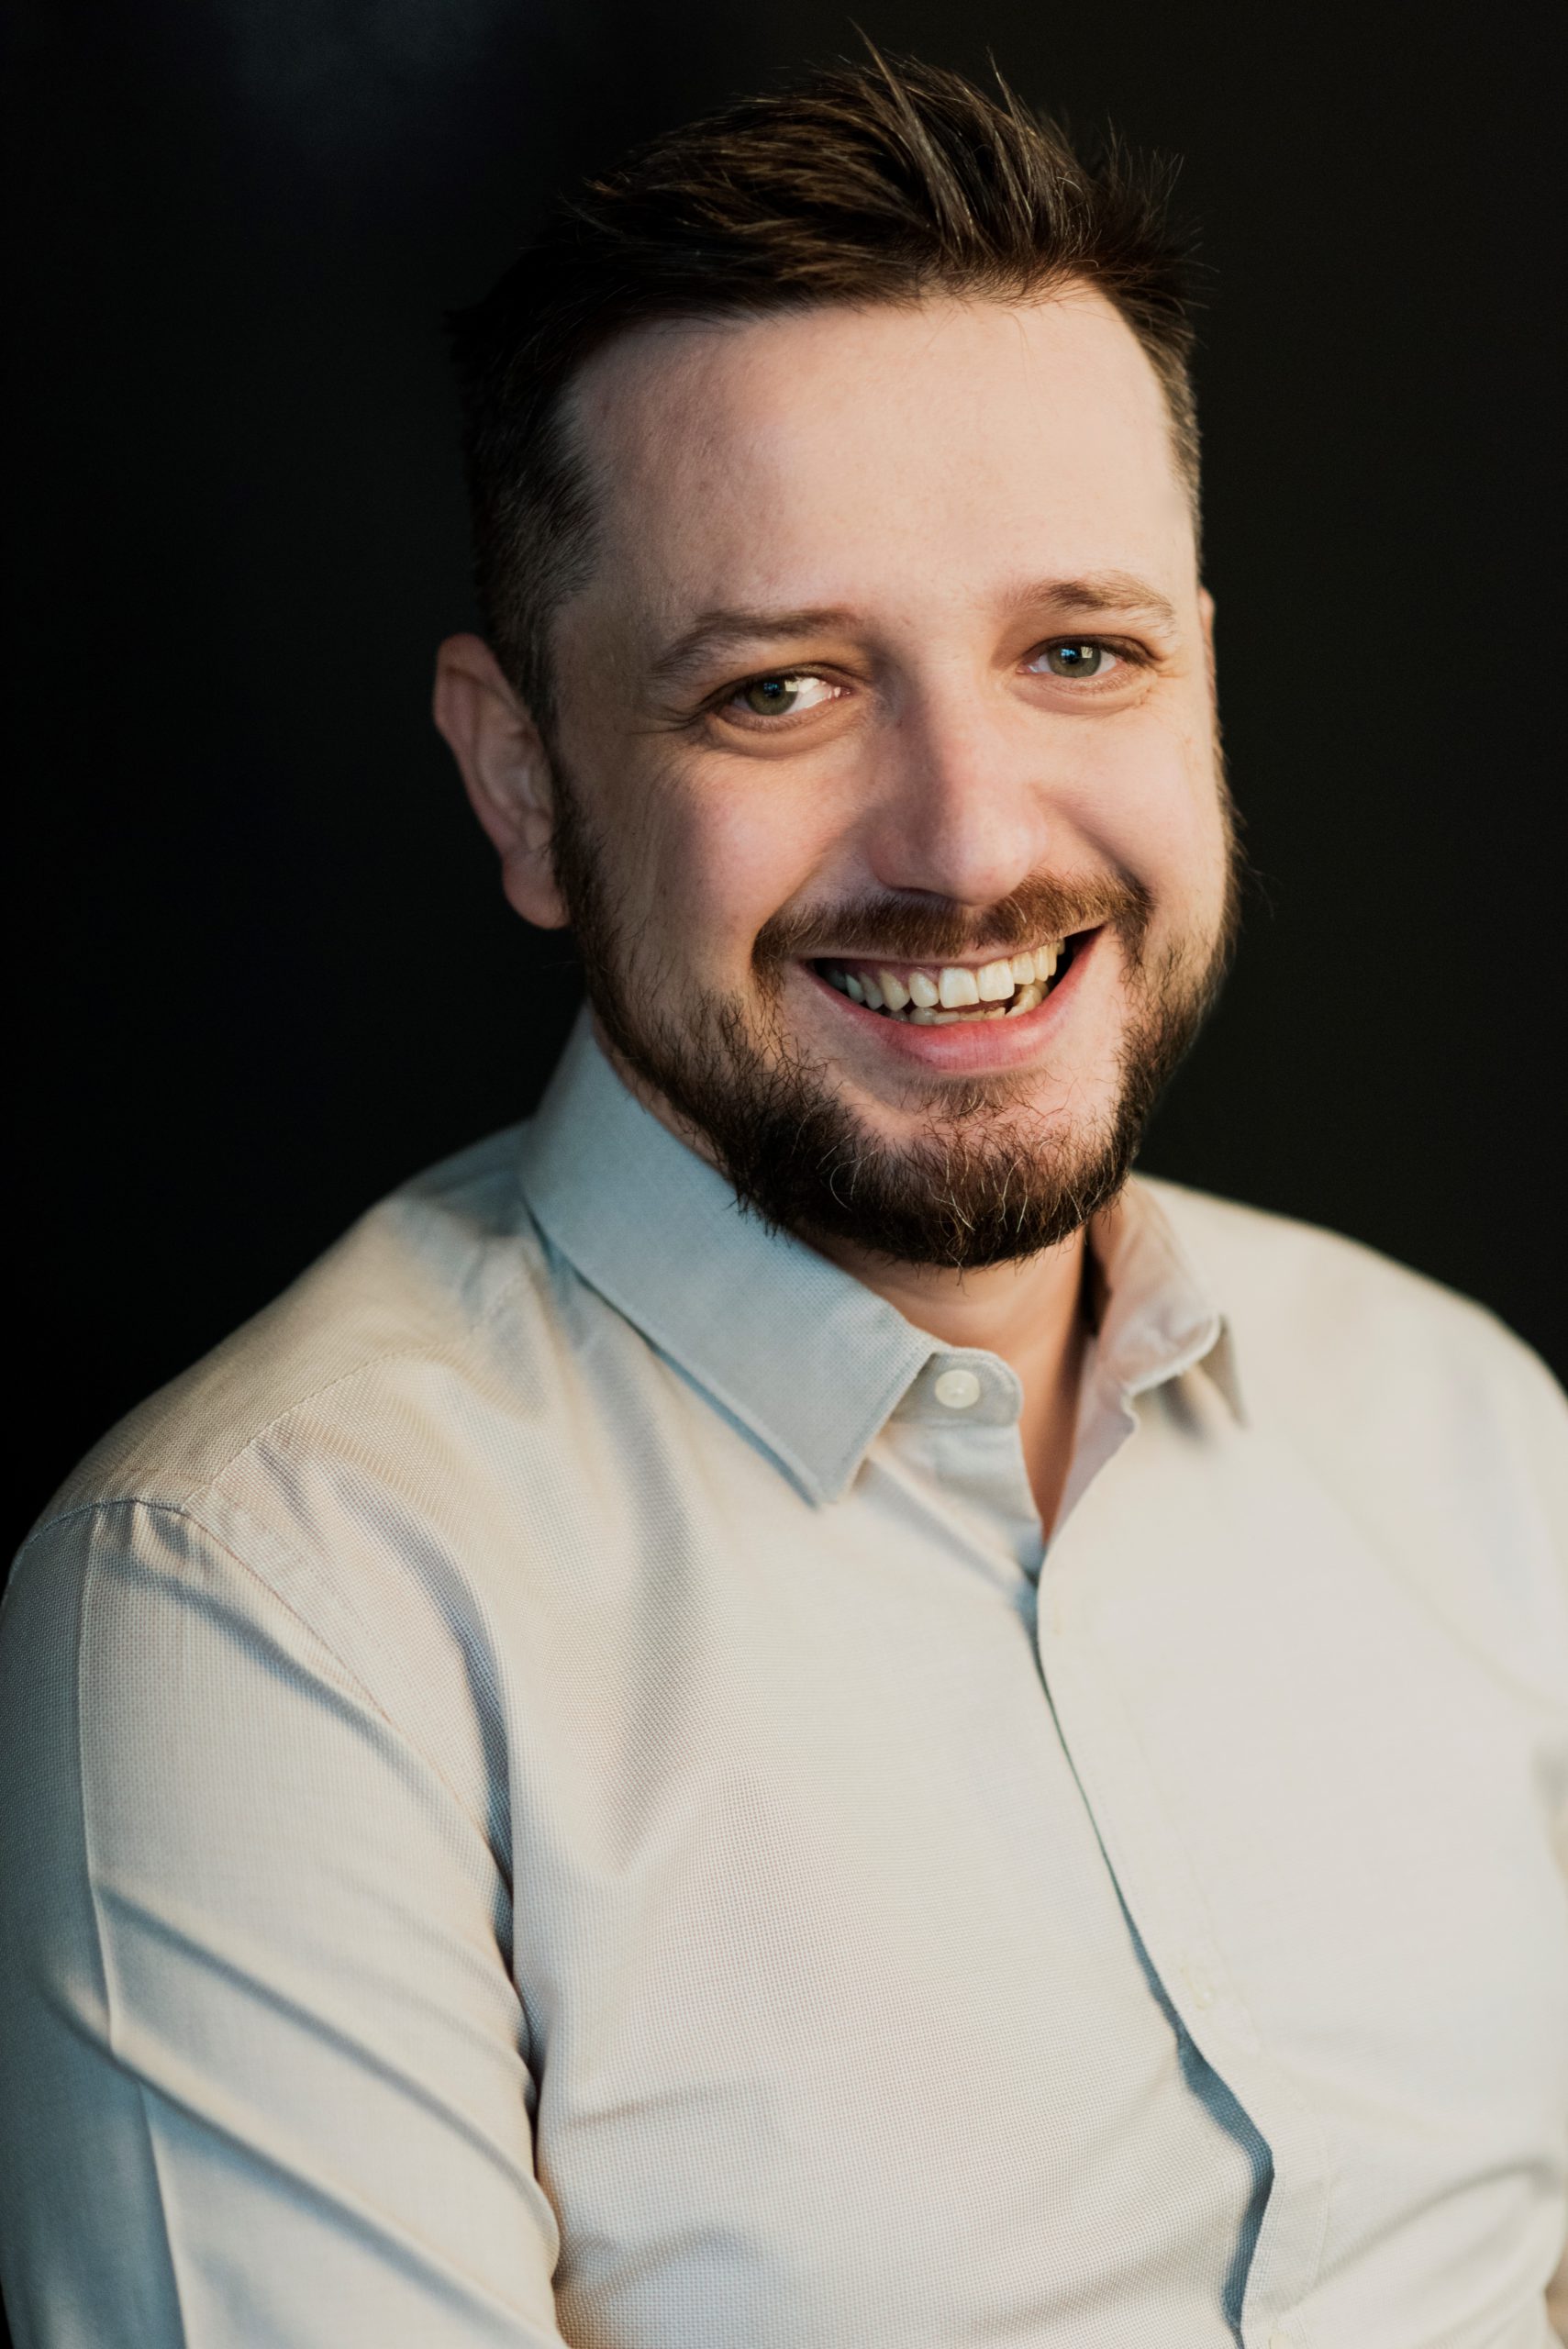 Hristo Pandjarov is Product Manager at SiteGround.